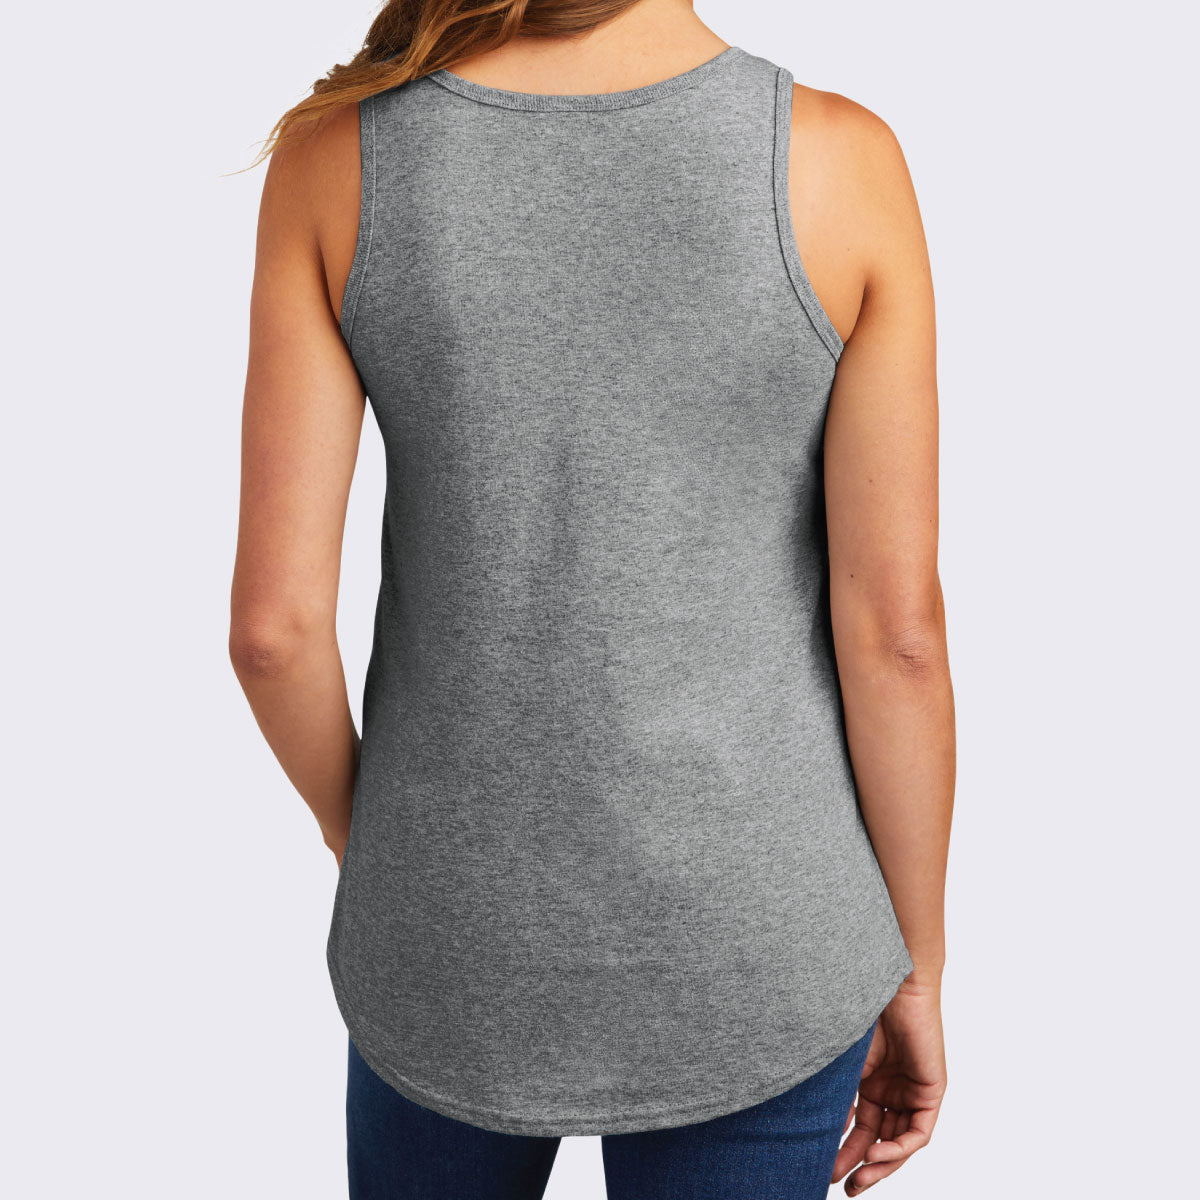 Weed Be Workout Friends Ladies Core Cotton Tank